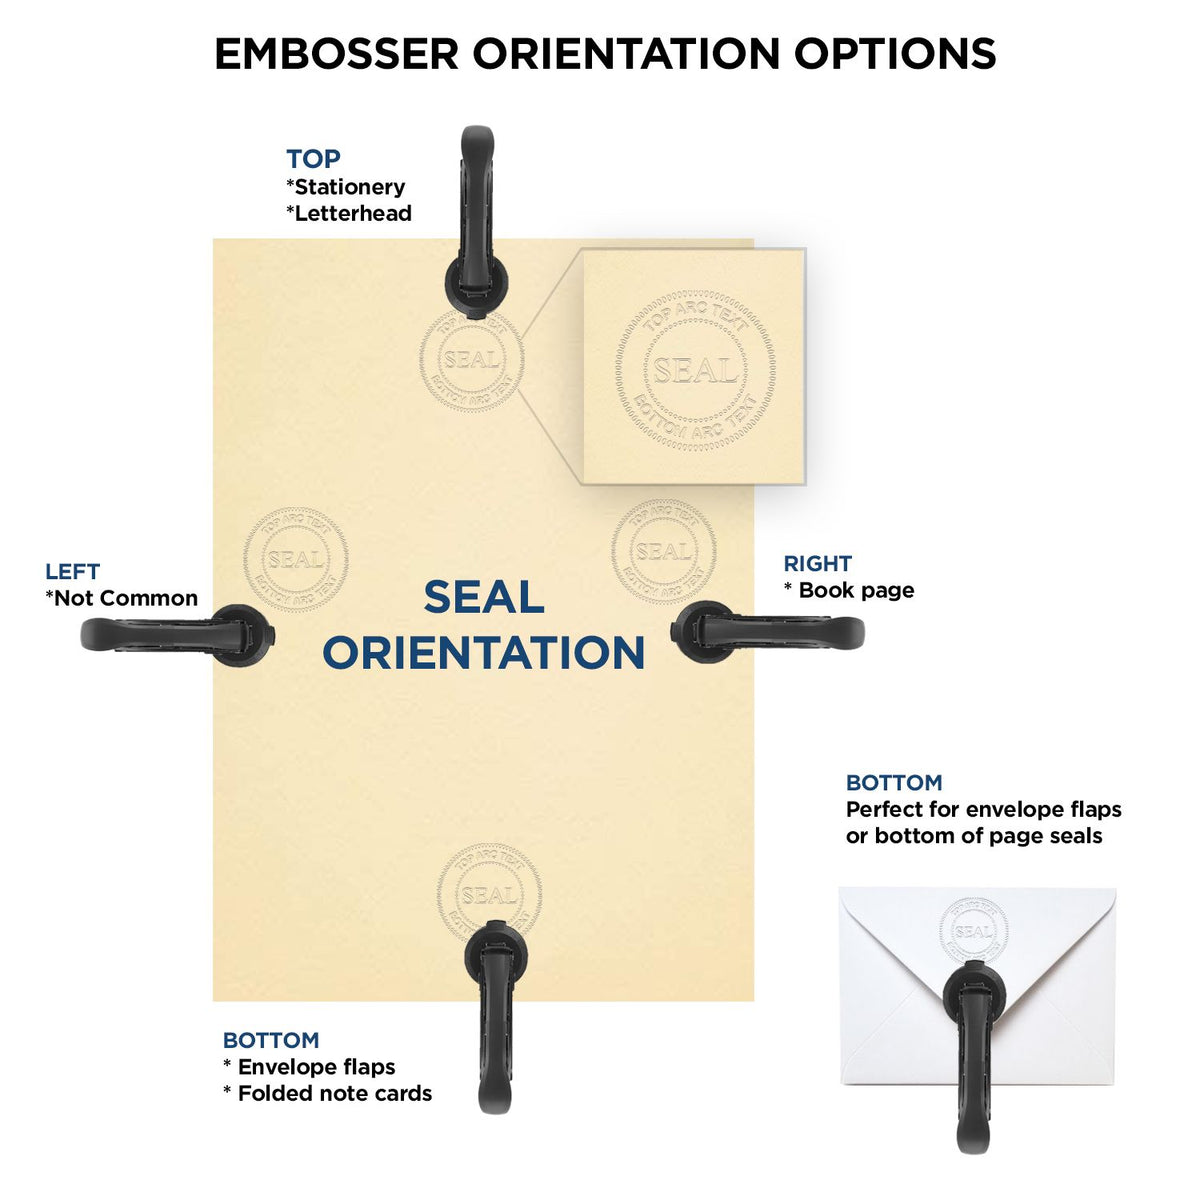 An infographic for the Long Reach Pennsylvania PE Seal showing embosser orientation, this is showing examples of a top, bottom, right and left insert.